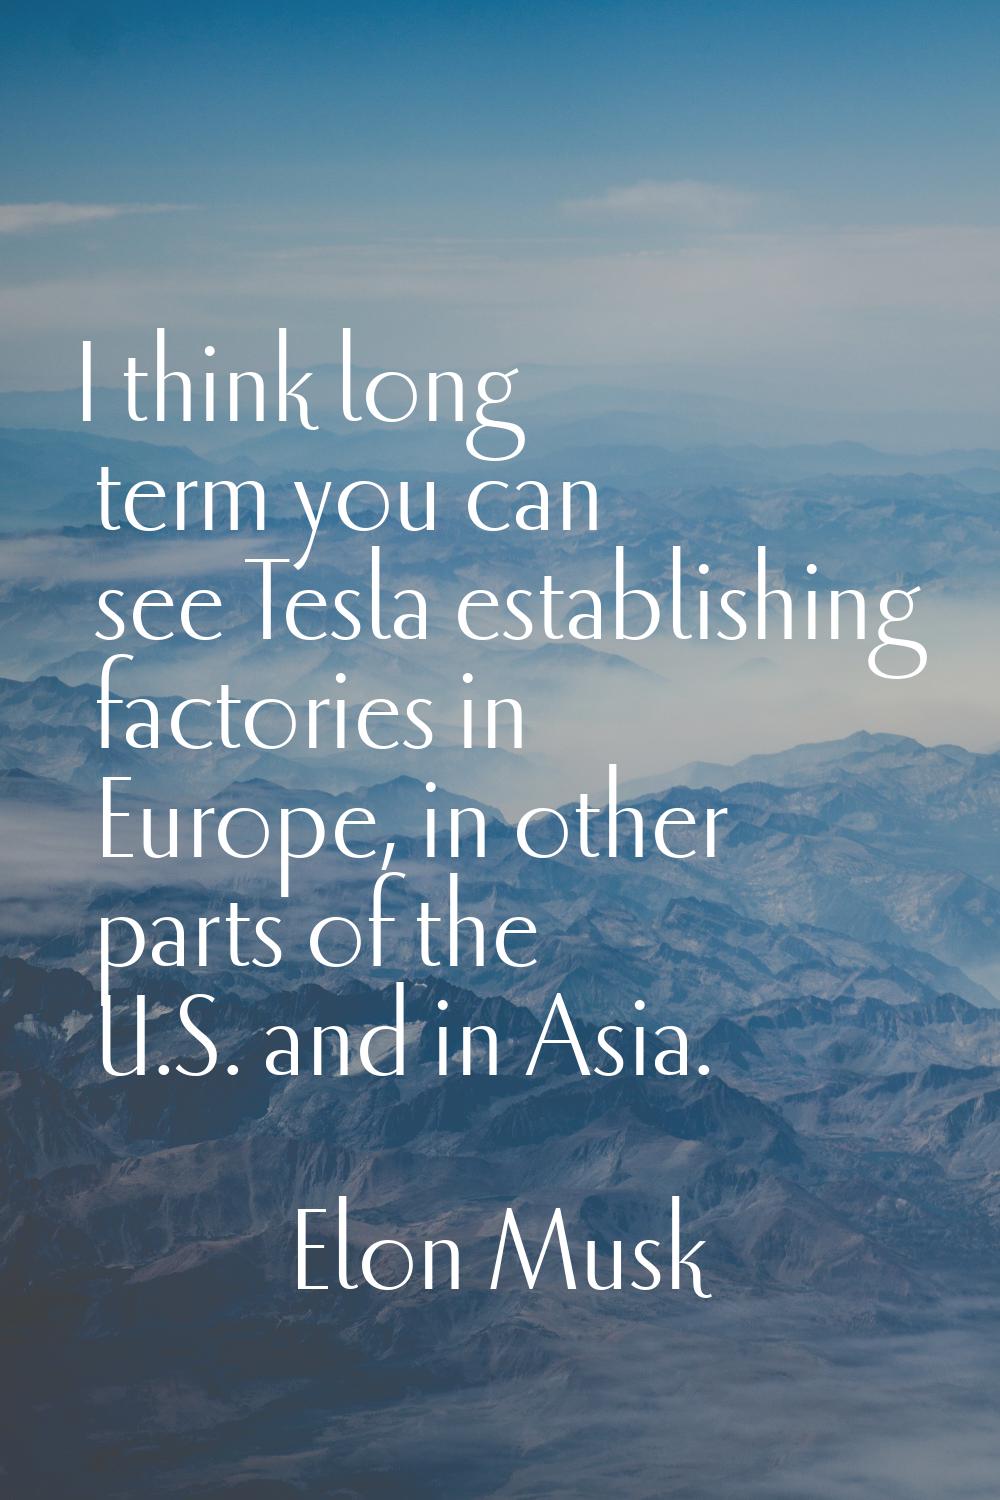 I think long term you can see Tesla establishing factories in Europe, in other parts of the U.S. an